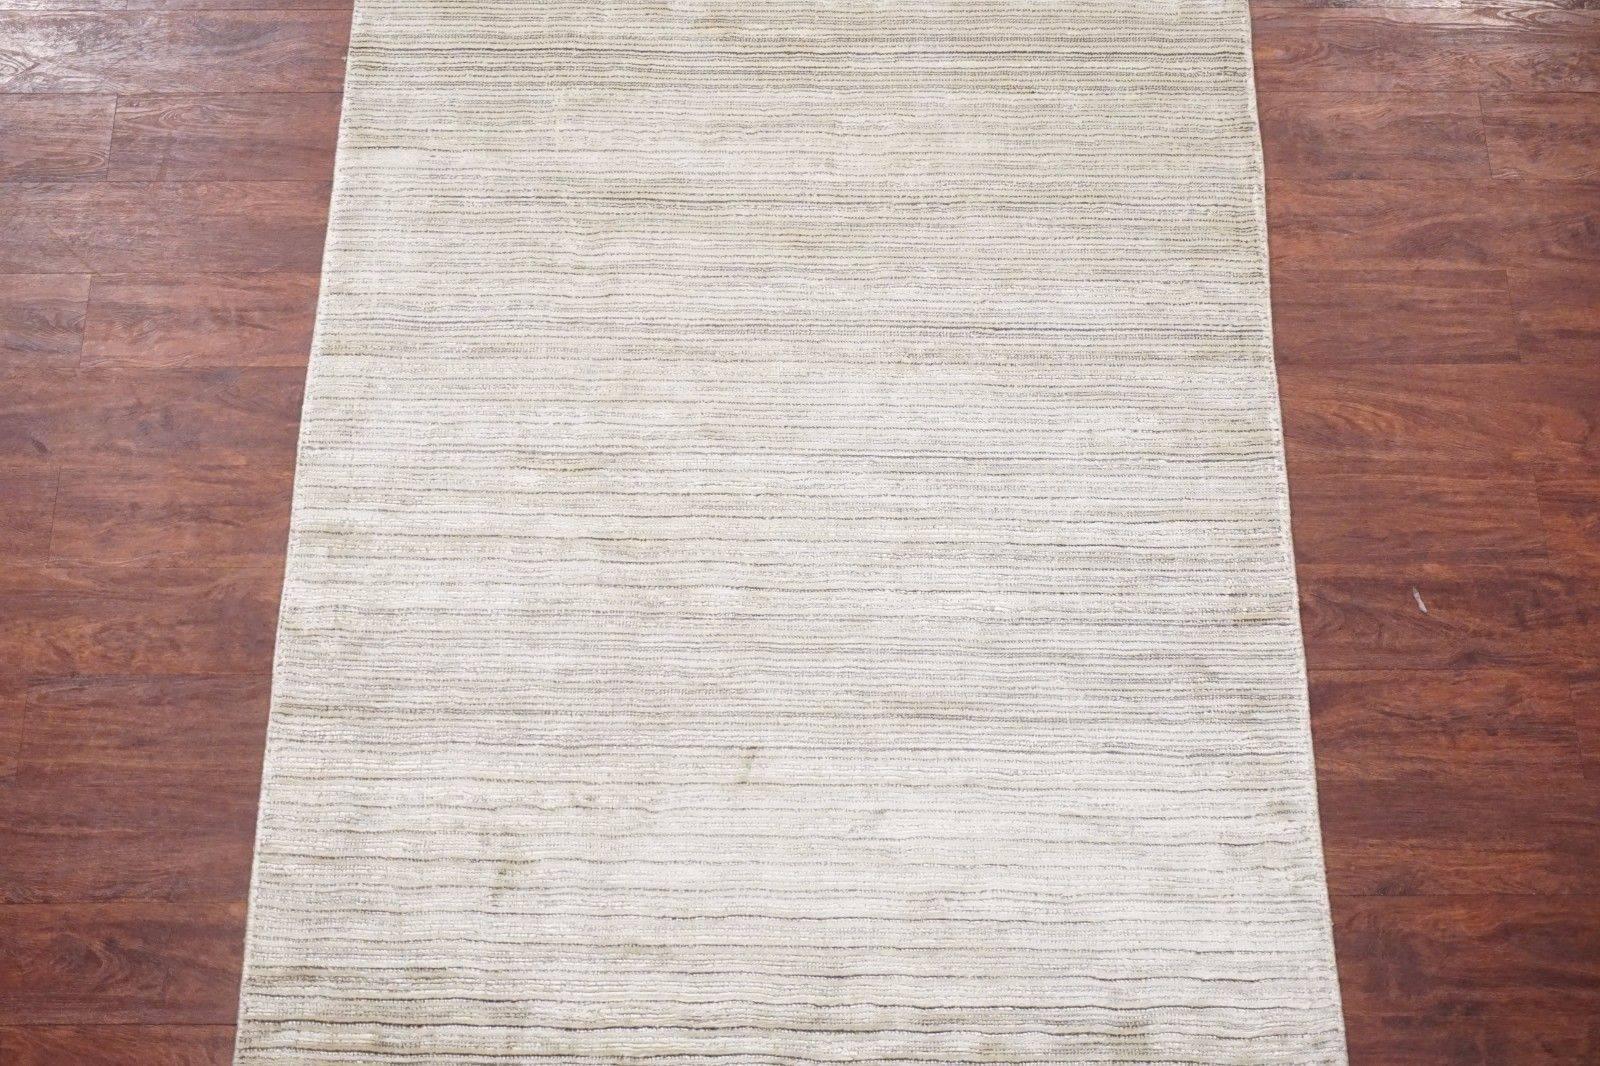 Small modern bamboo silk area rug with striped design

2015

Measures: 4' x 5' 10